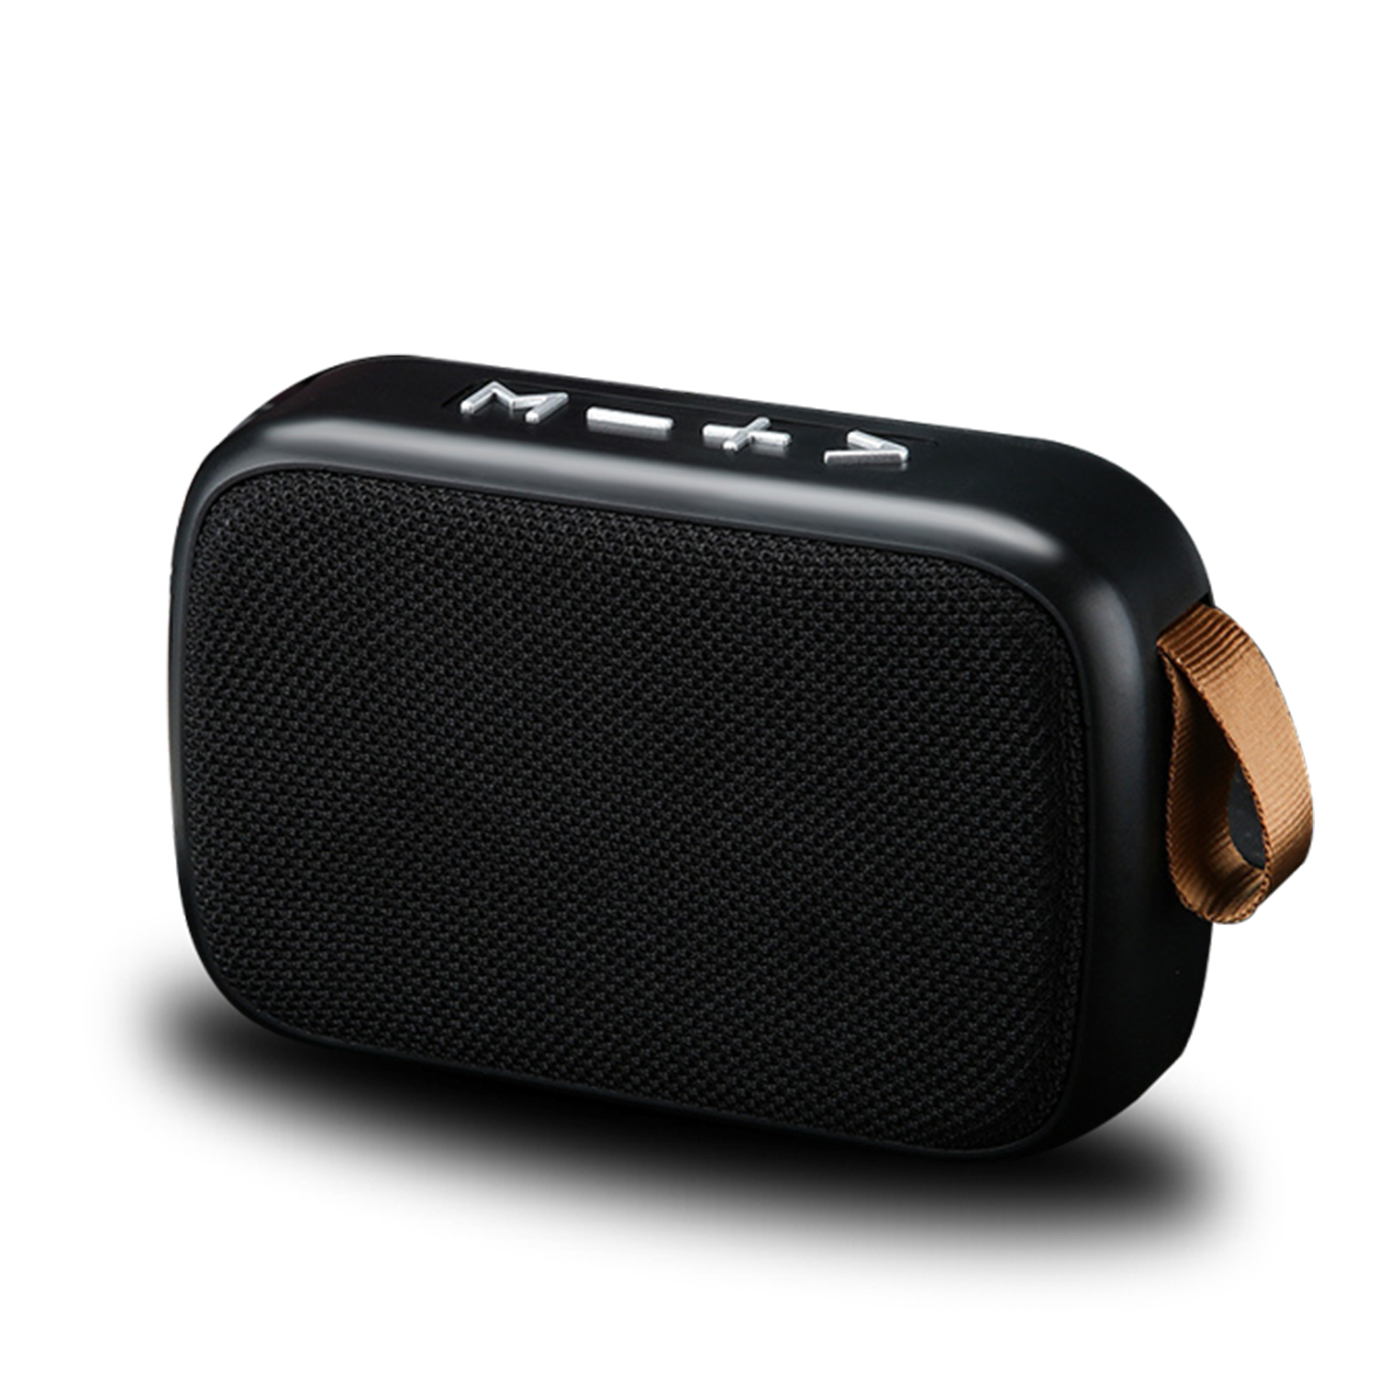 Bluetooth Speaker Buy wholesale and Corporate purchase from China. Trusted trading company Union Power by thousands from around the globe